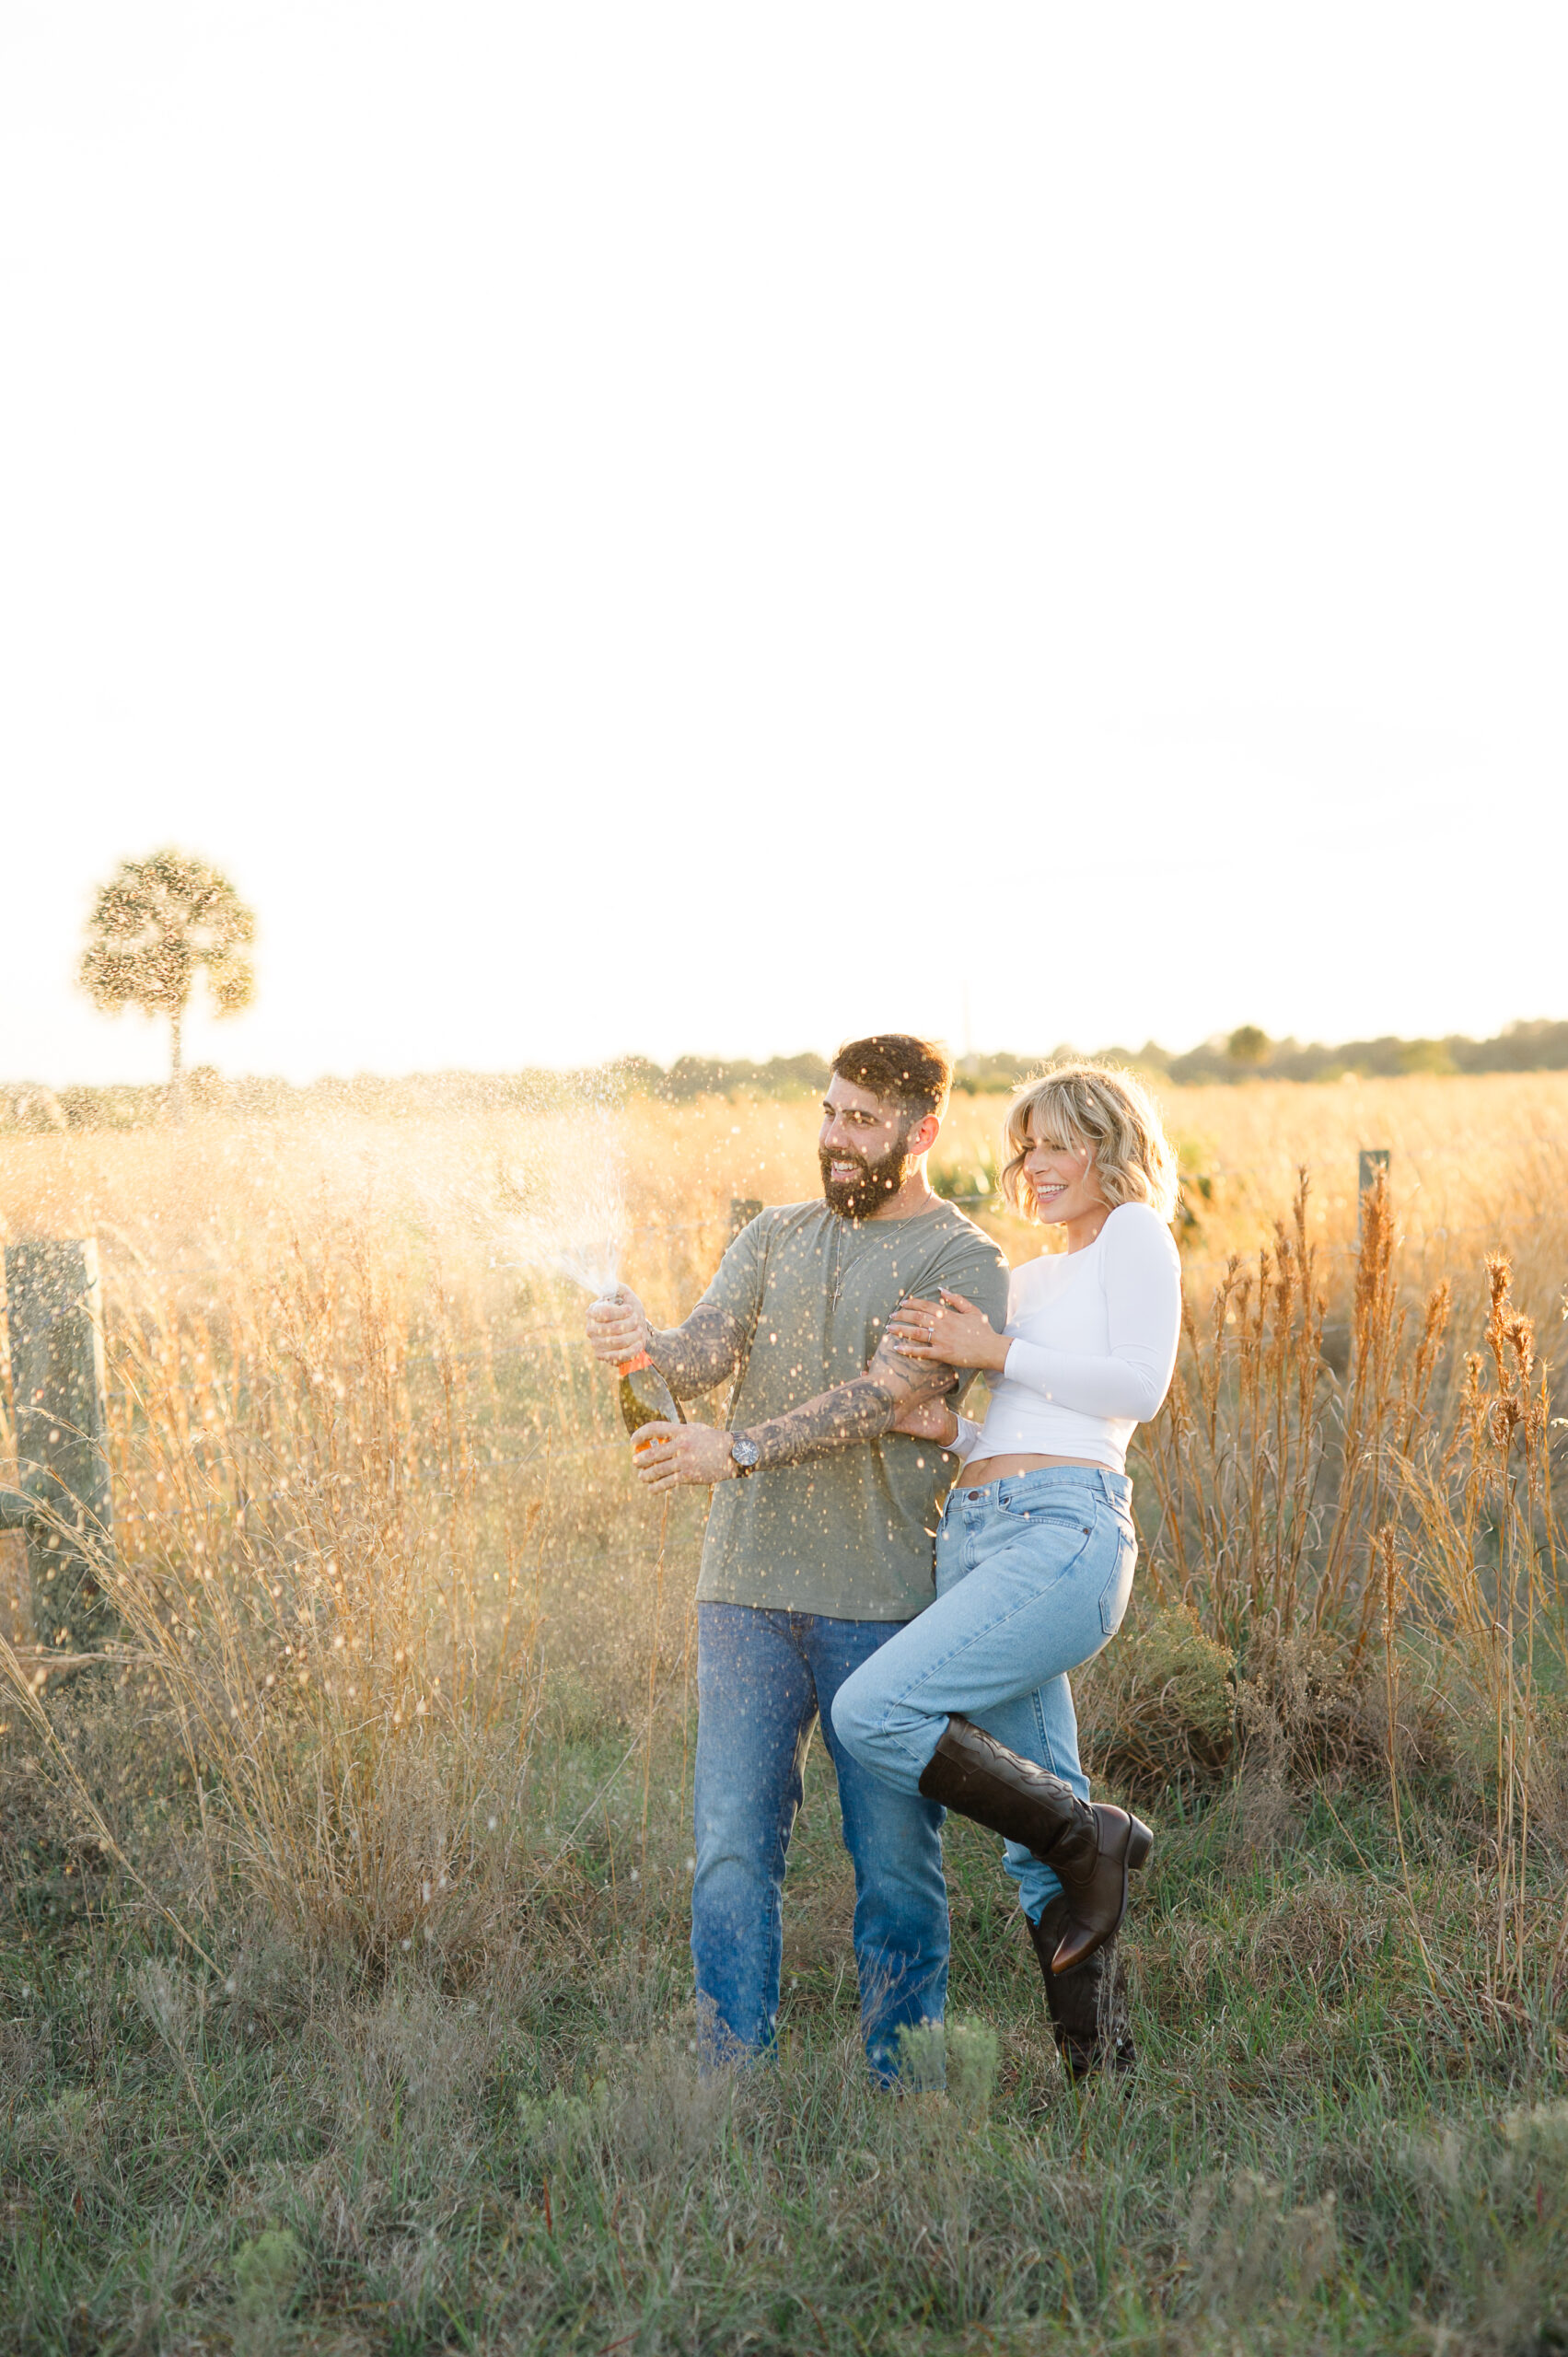 Popping champagne in a tall grass field to celebrate their engagement with orlando couples photographer M. Lauren spas in Orlando